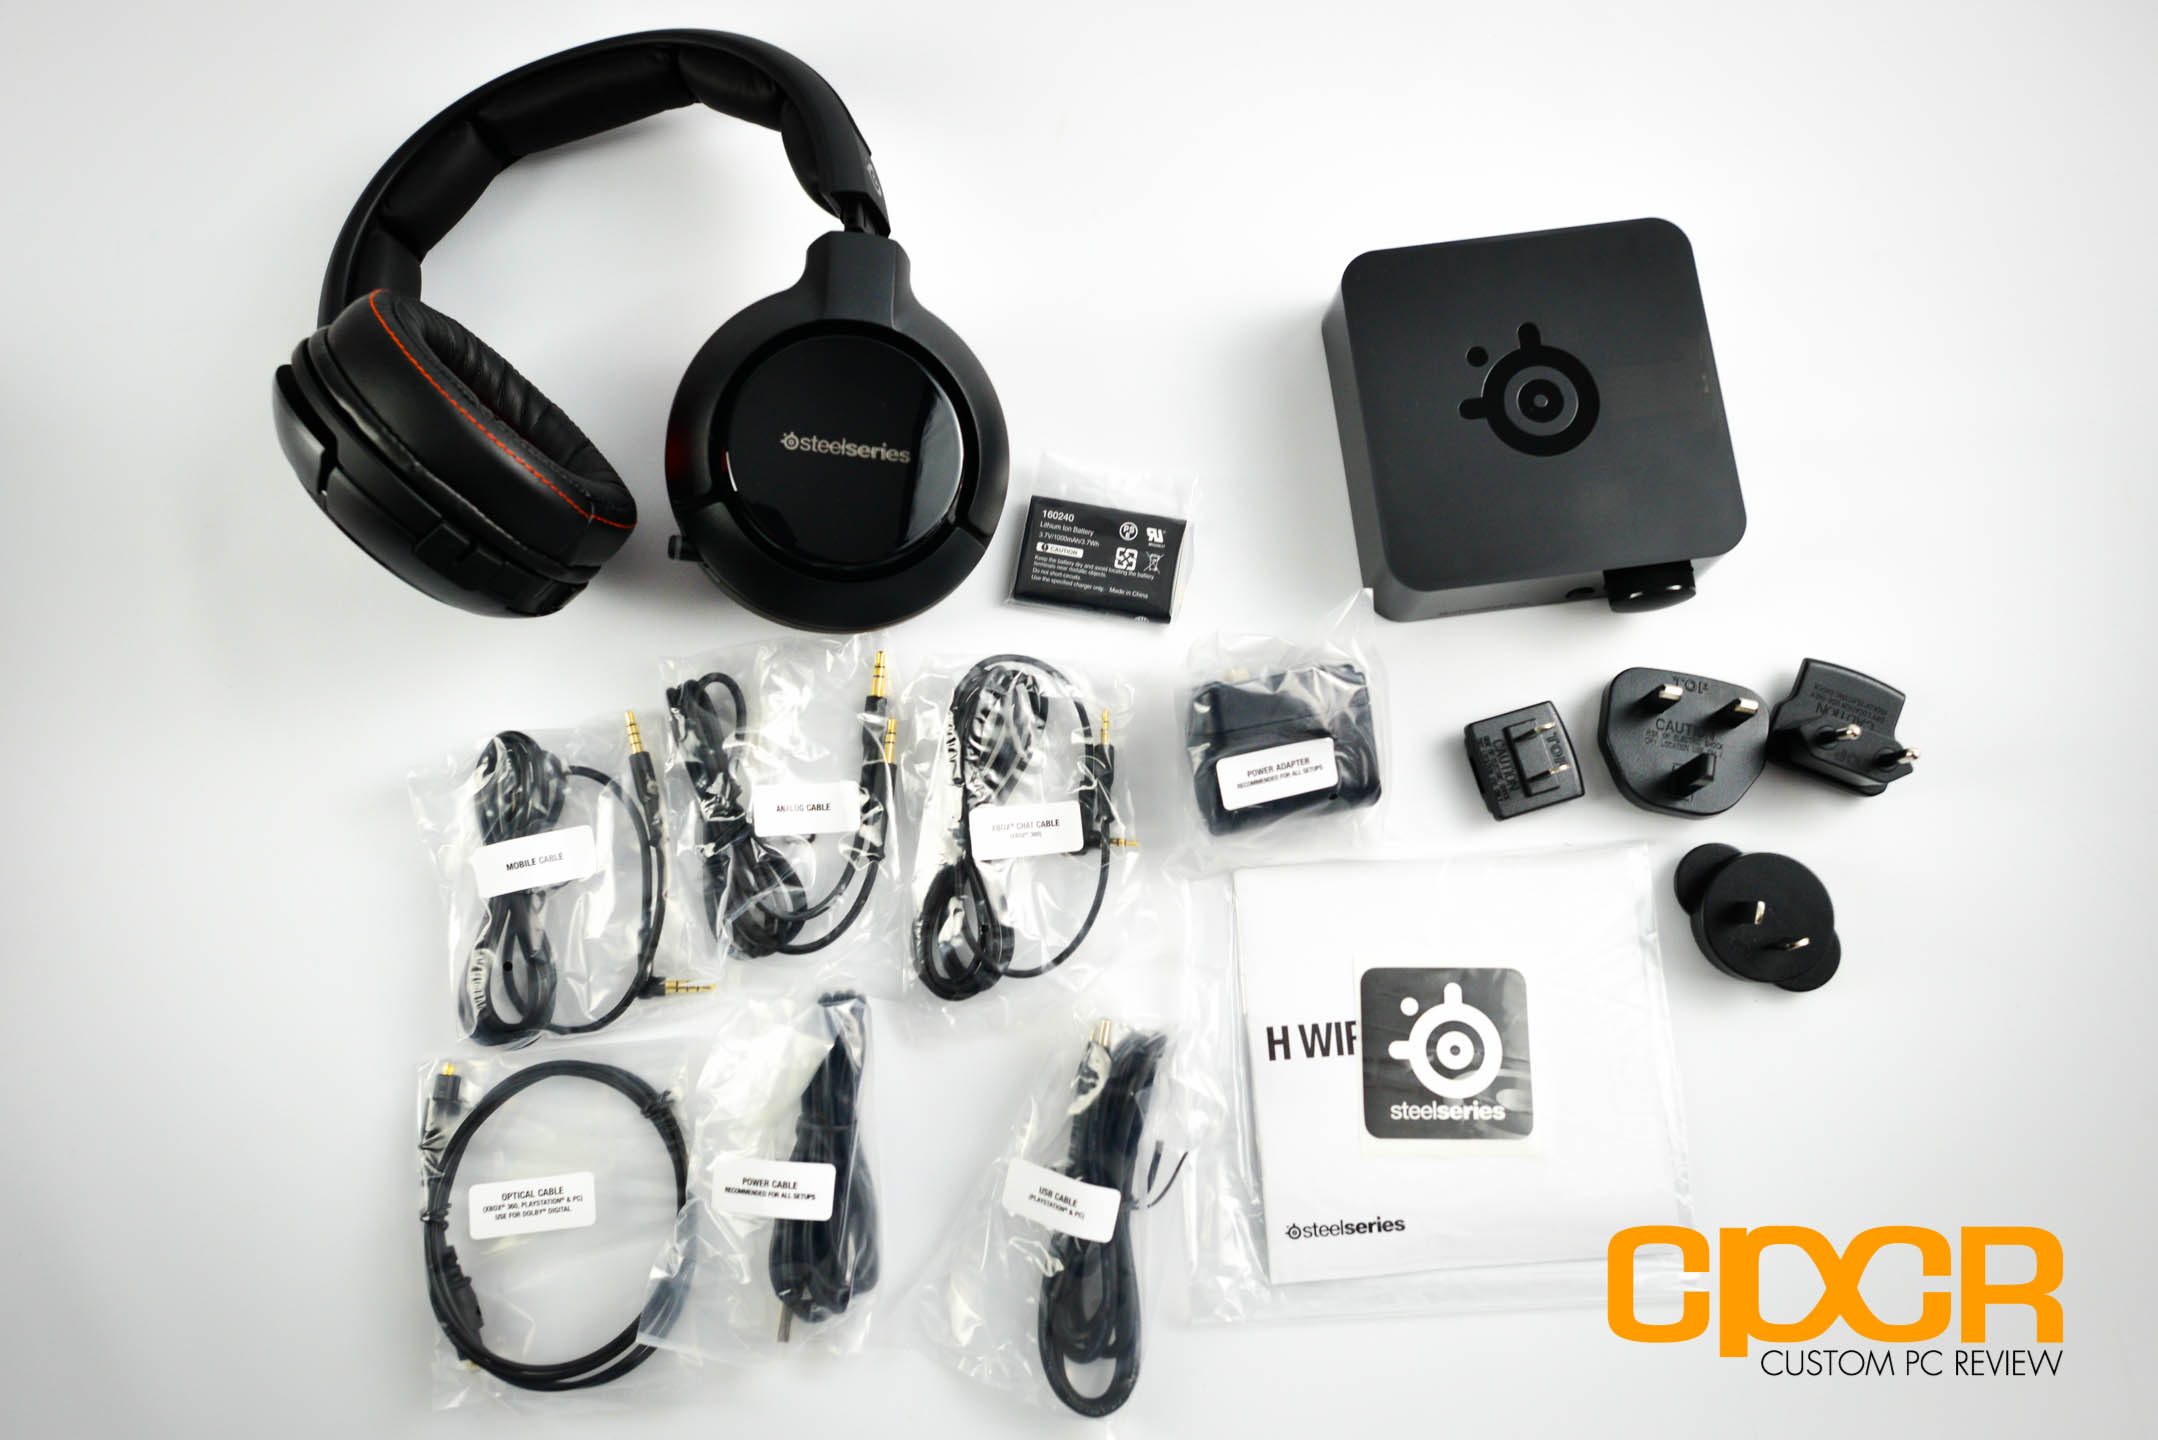 http://www.custompcreview.com/wp-content/uploads/2014/05/steelseries-wireless-h-gaming-headset-custom-pc-review-3.jpg